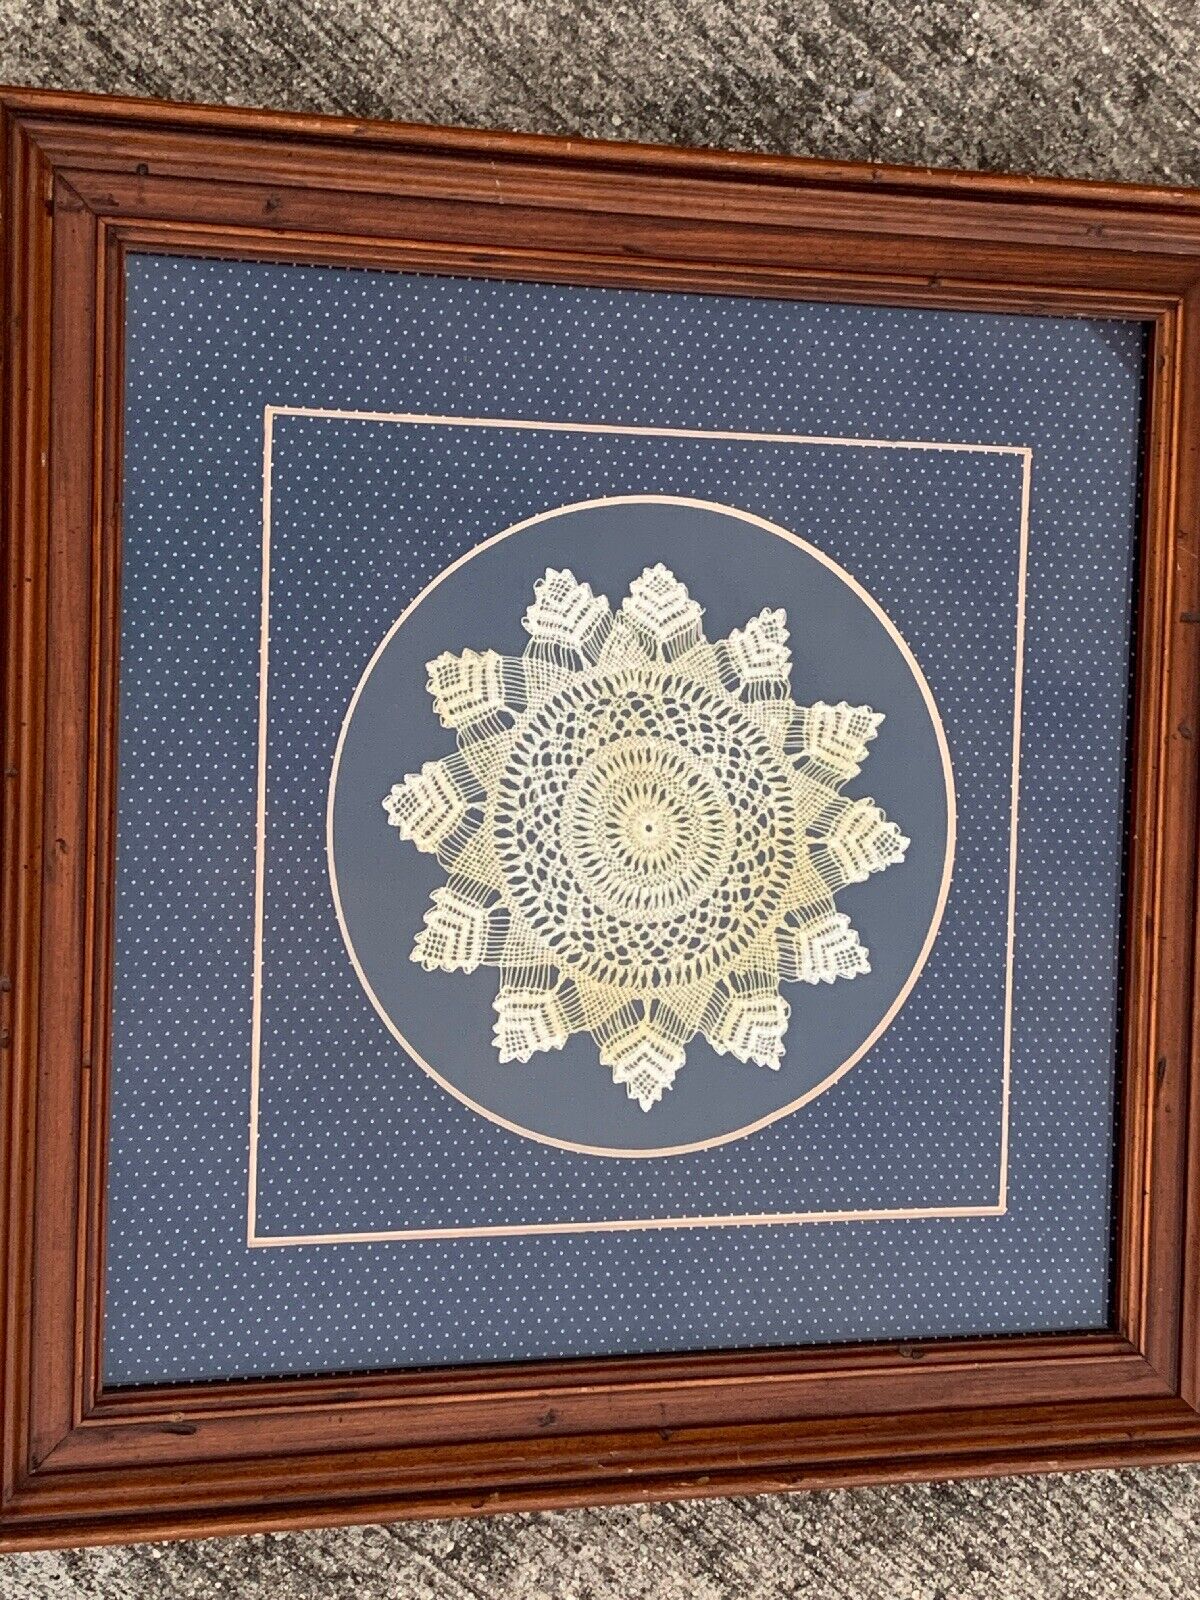 Antique Amish Doile Doily Doilies Hand Stitched GRANDMA\'S FRAMED ART  12.5/12.5